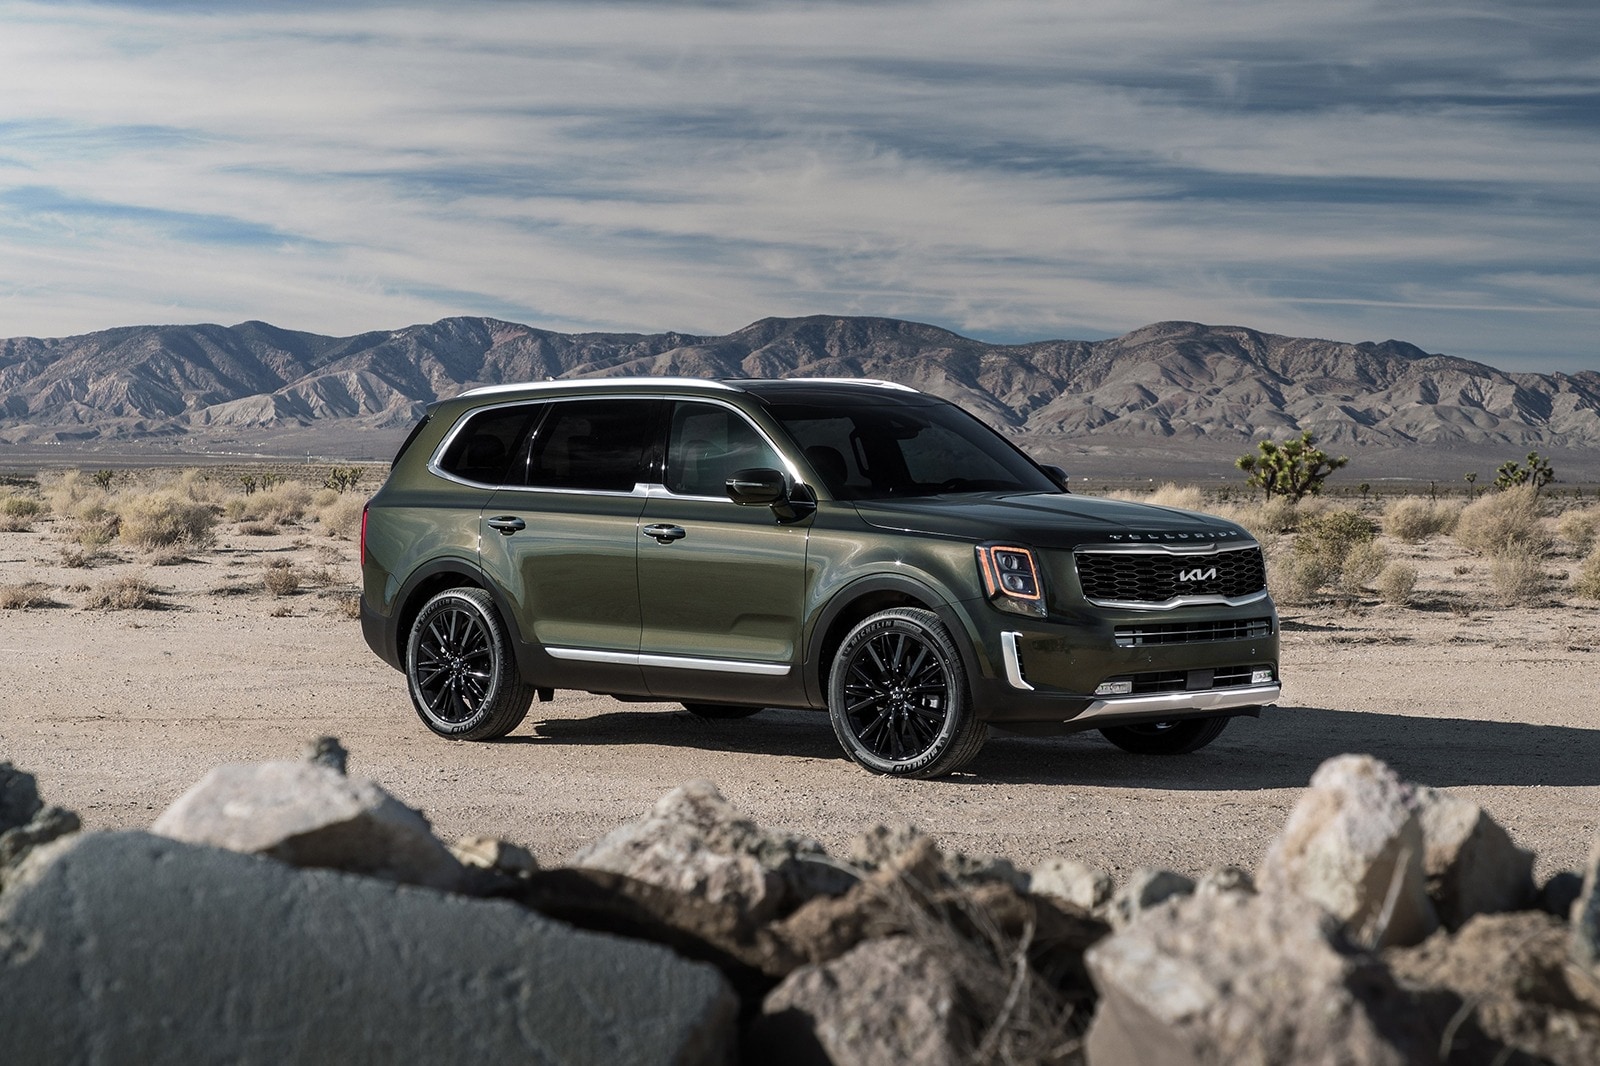 2022 Kia Telluride: The One We Recommend